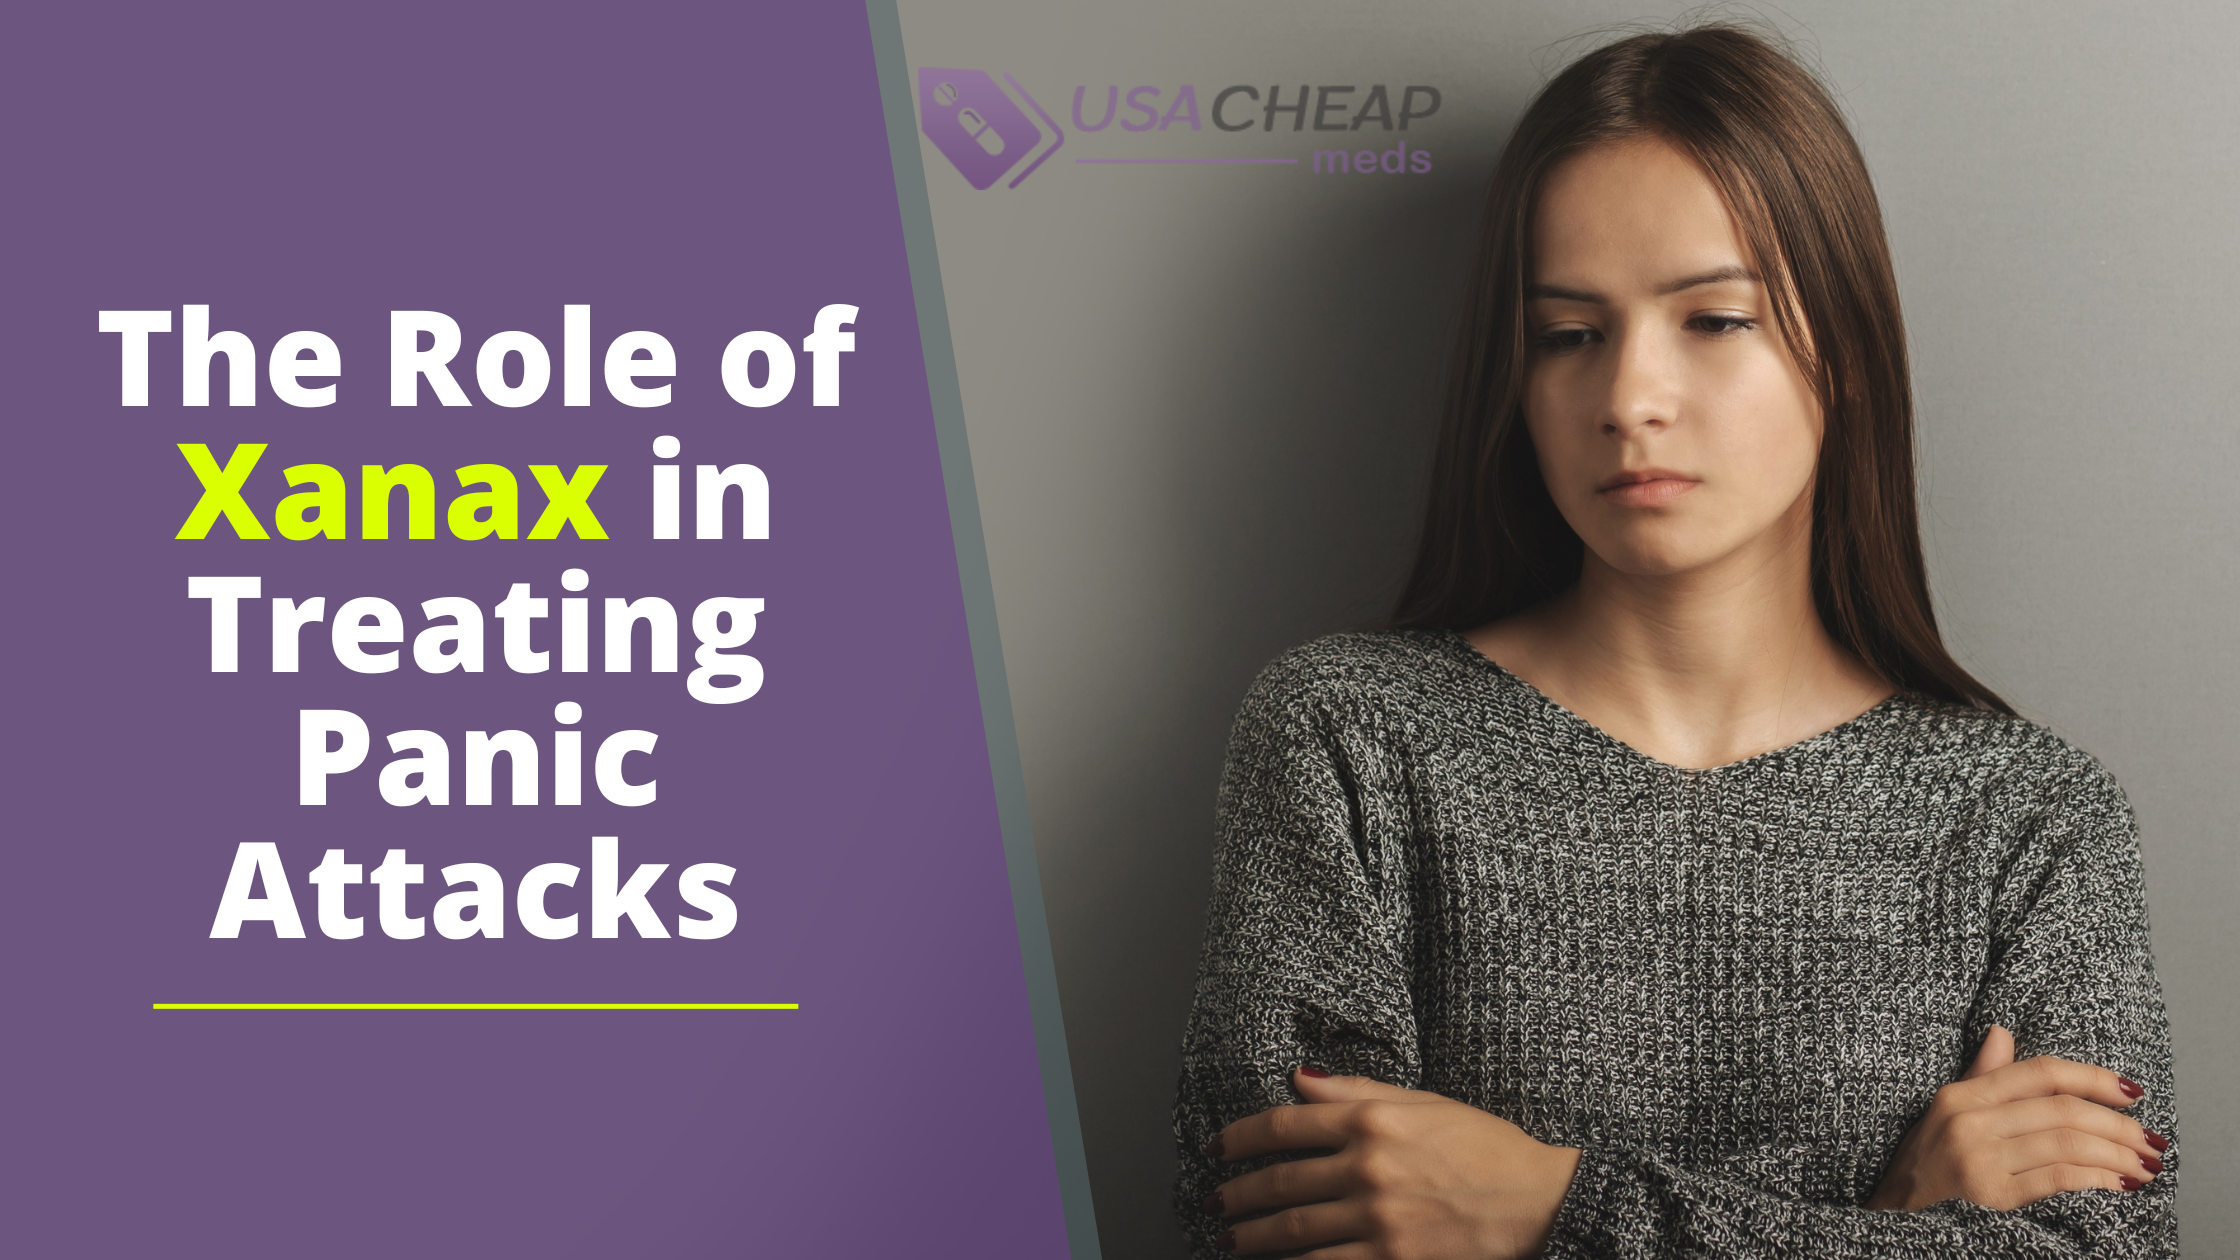 The Role of Xanax in Treating Panic Attacks